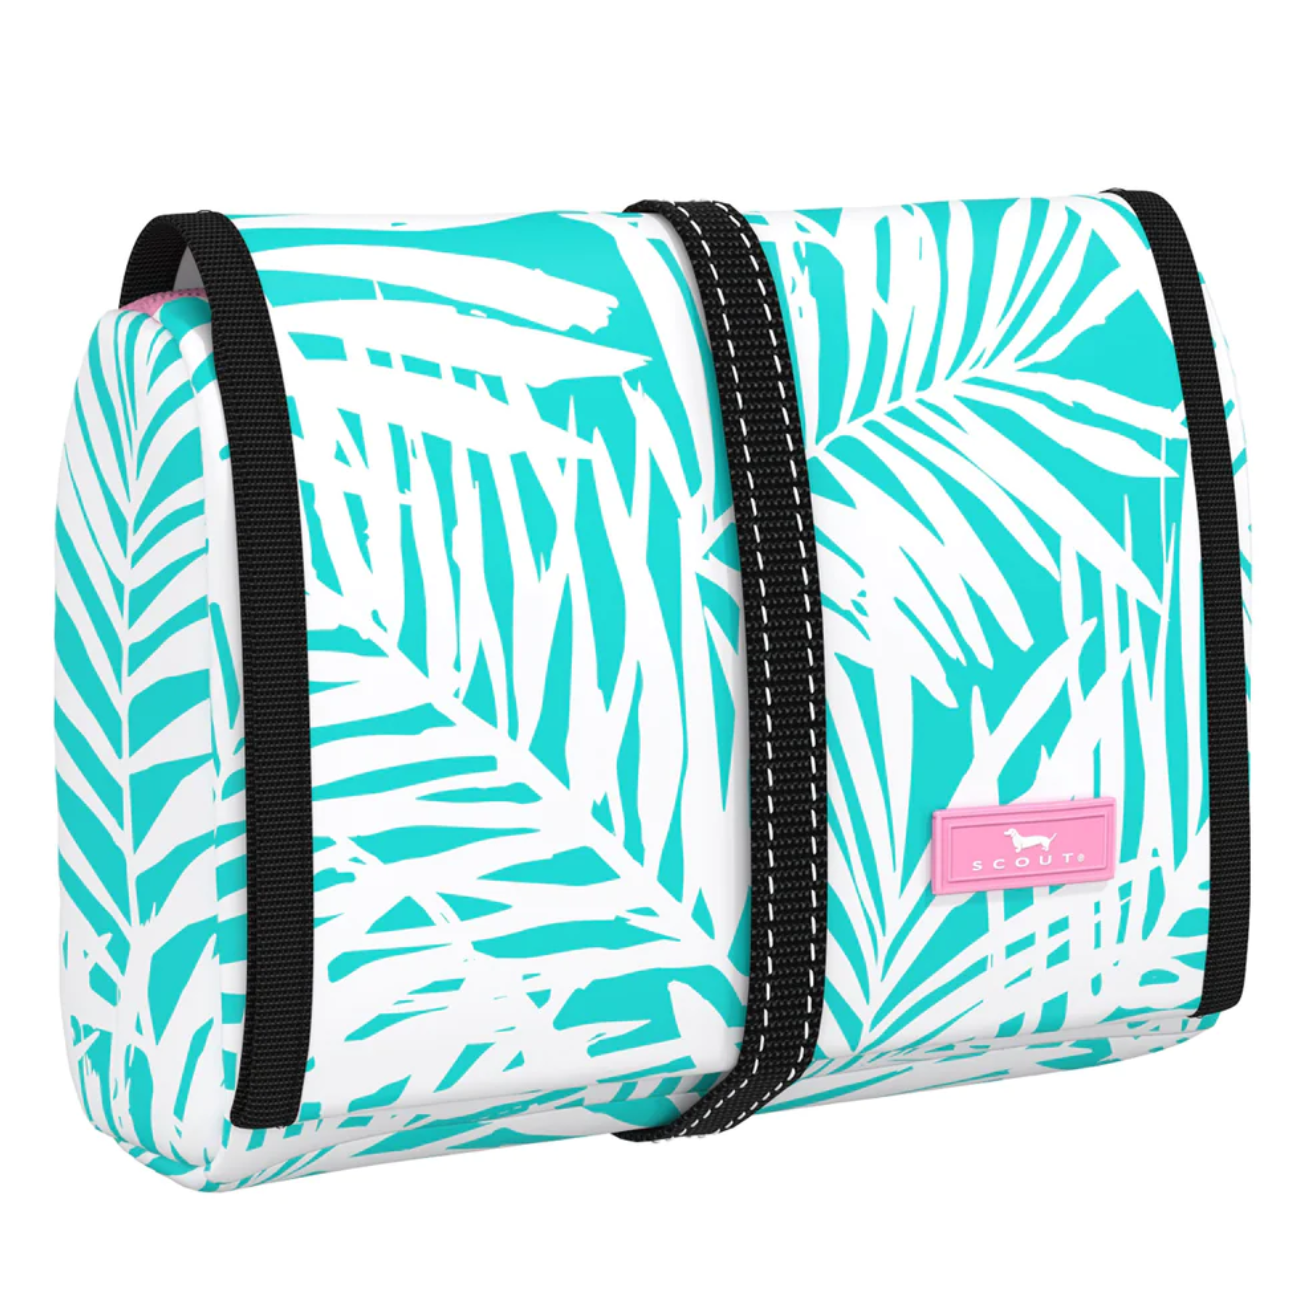 Scout Beauty Burrito Toiletry Bag Travel Accessories in Miami Nice at Wrapsody